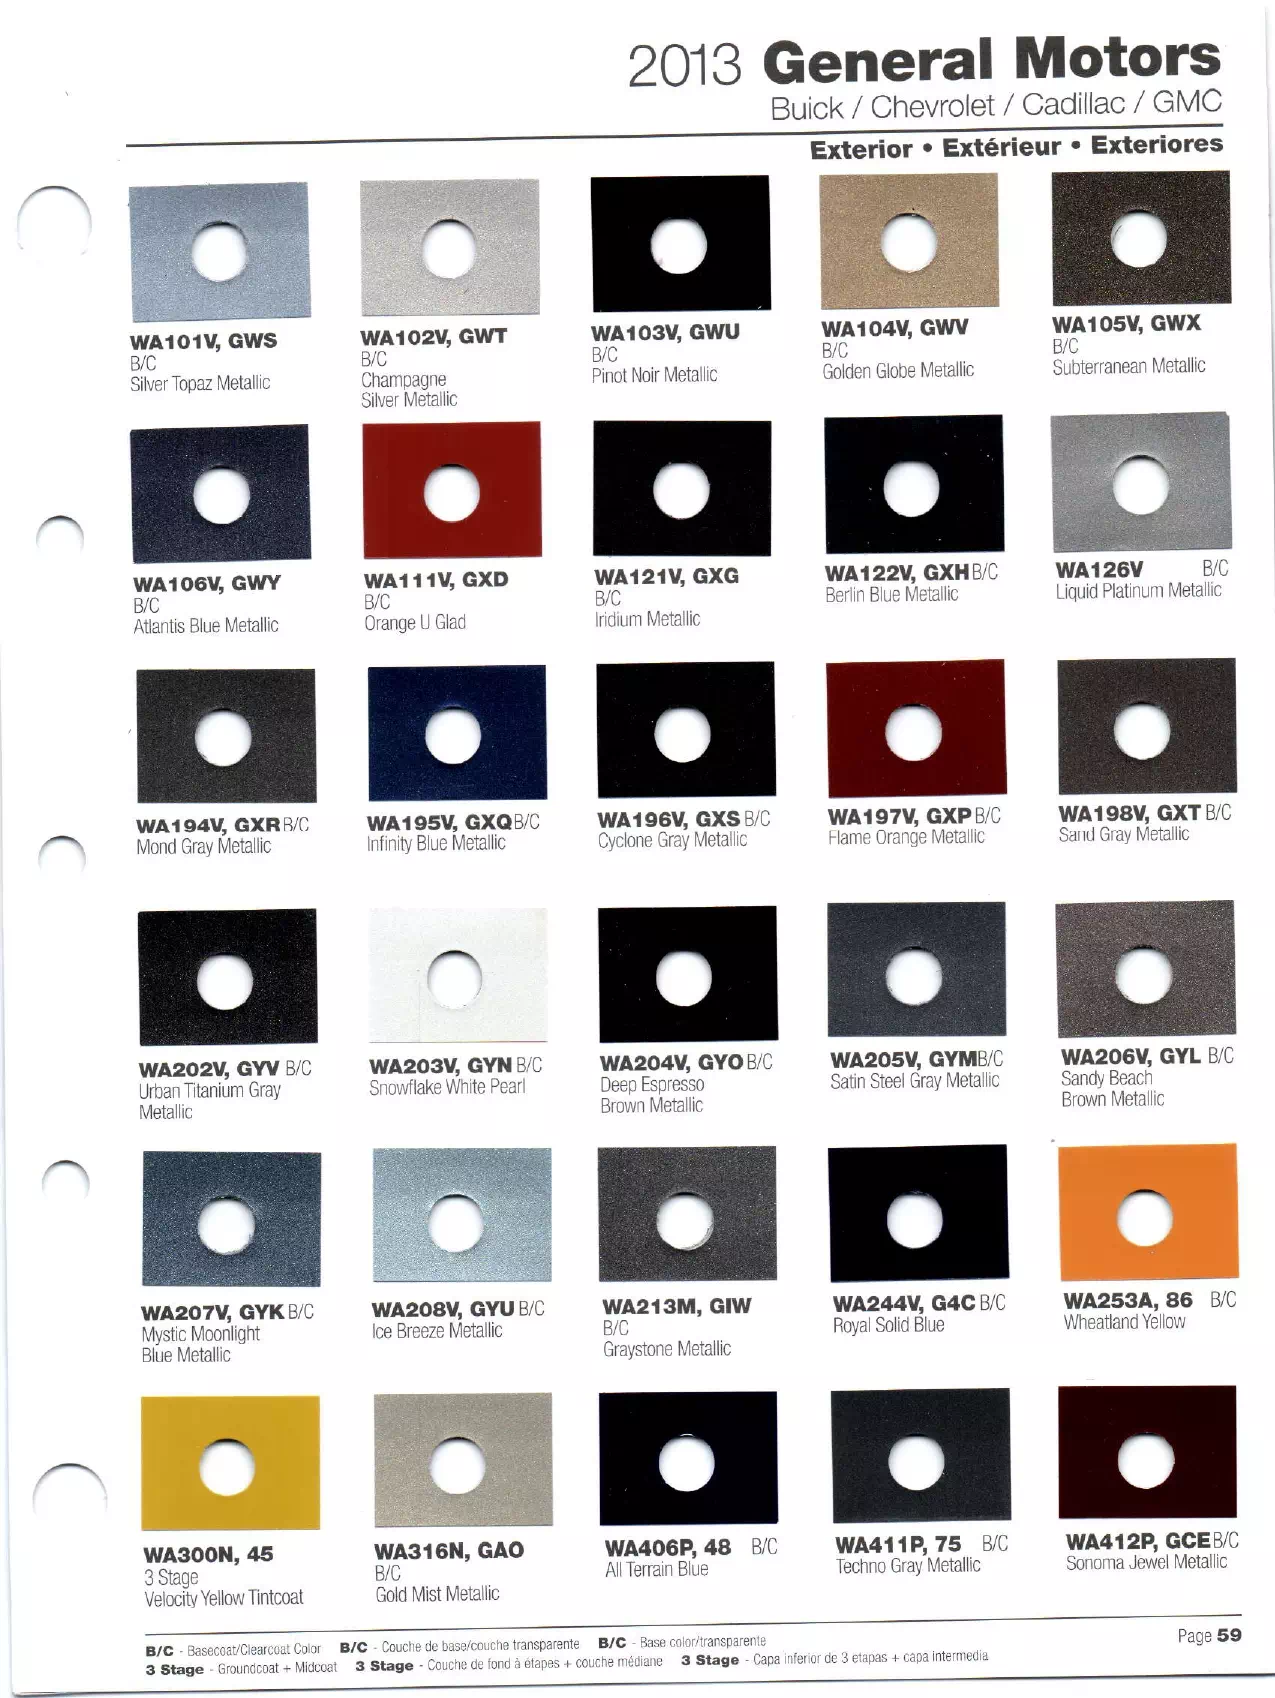 Paint codes, and their ordering stock numbers for their color on 2013 vehicles